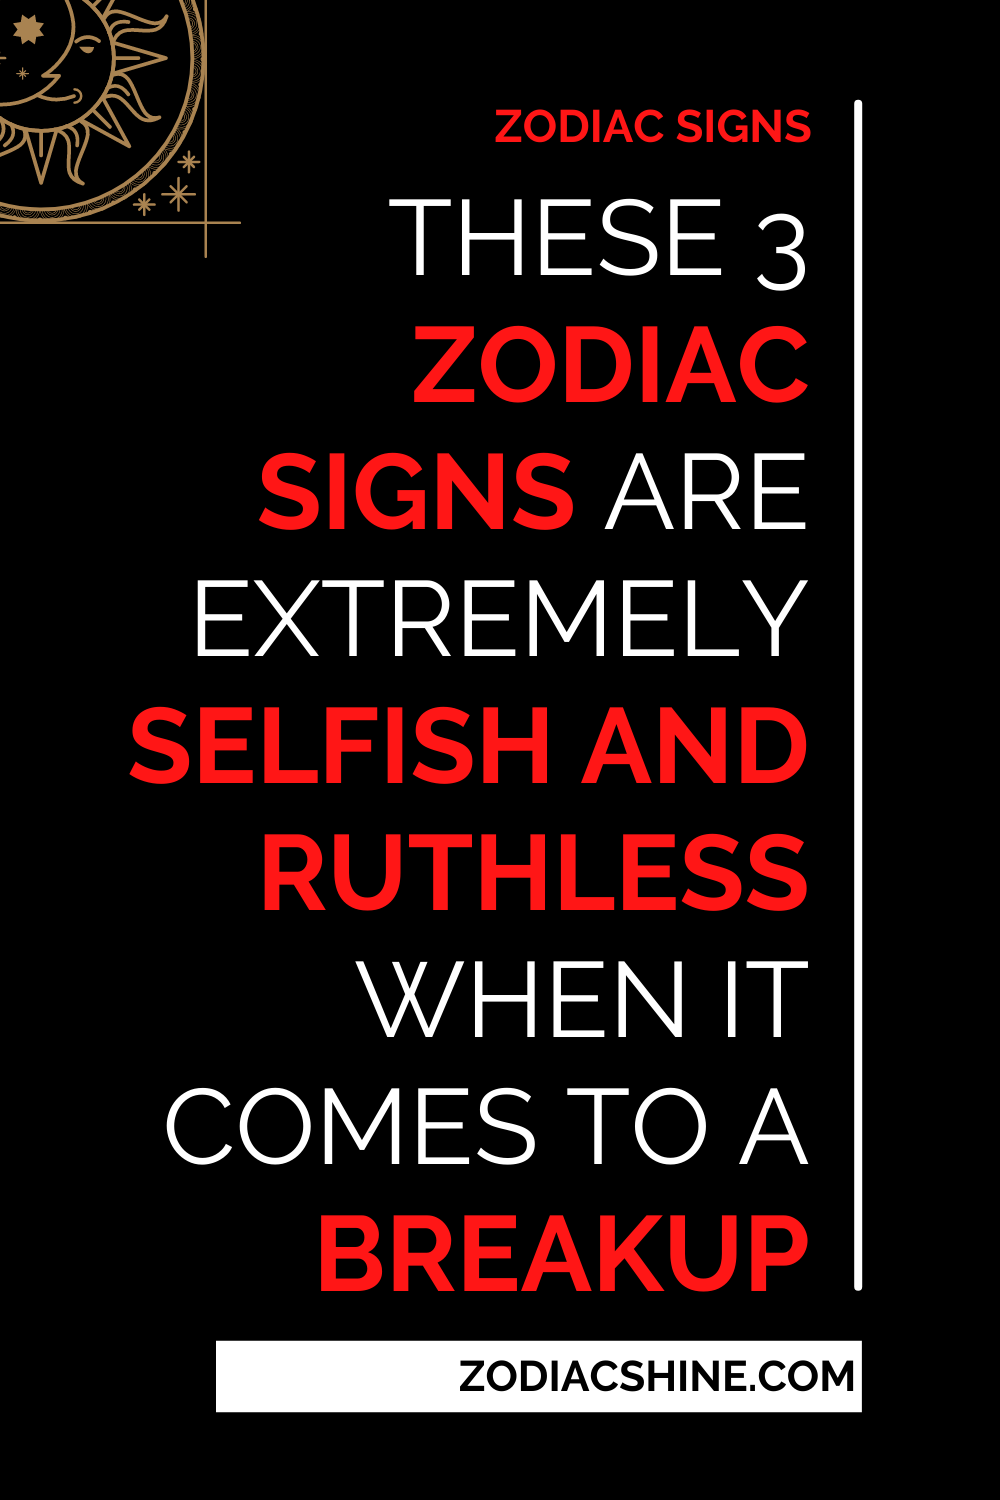 These 3 Zodiac Signs Are Extremely Selfish And Ruthless When It Comes To A Breakup